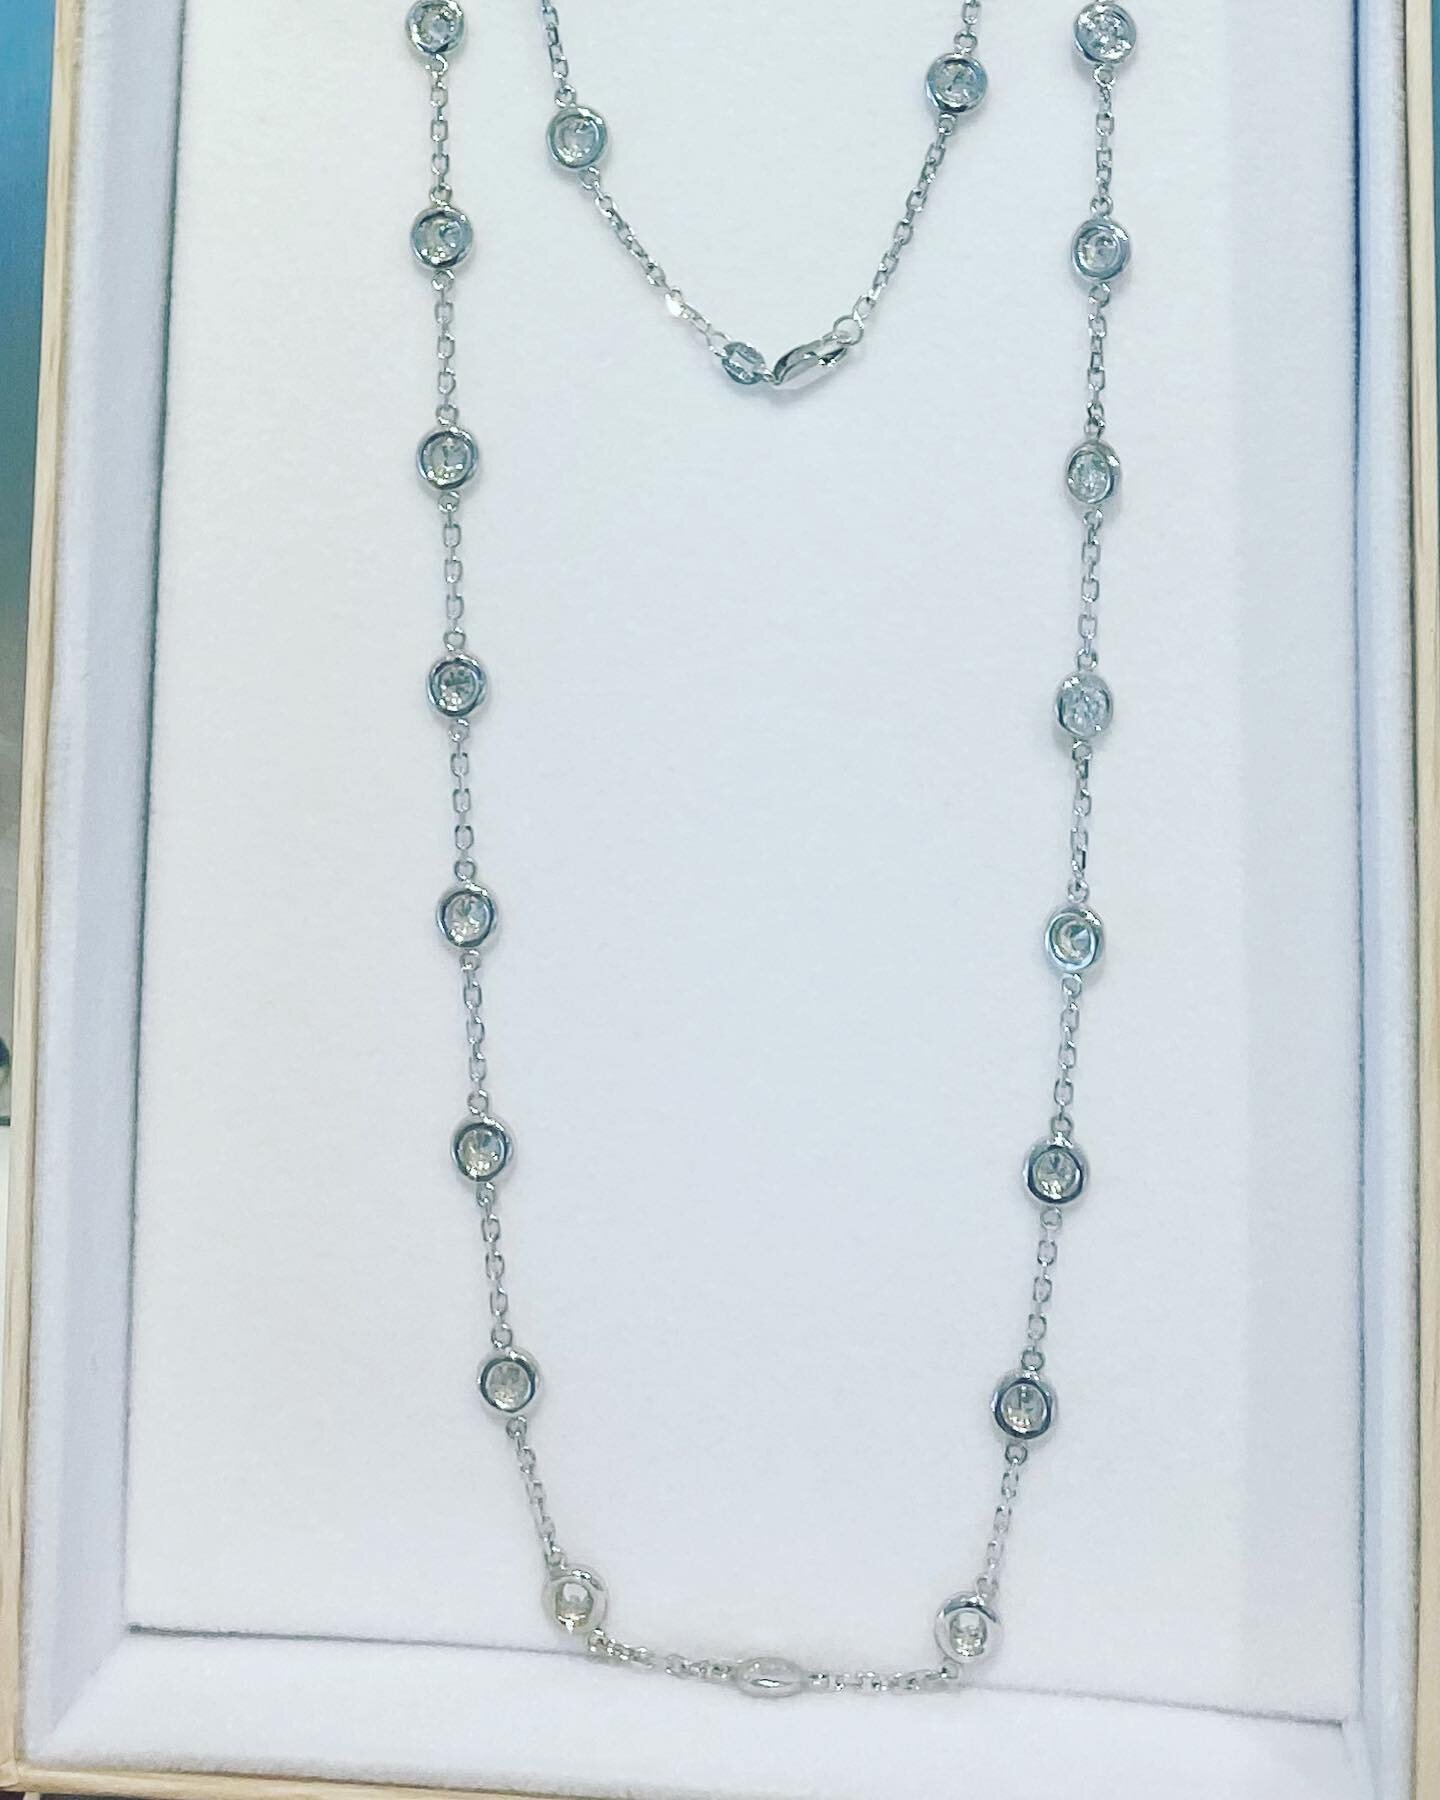 One of the most gorgeous necklaces I have ever made, 21 diamond stations .16 carats each 3.30 carats total, set into 14k white gold. #wow #diamondbytheyard #diamondnecklace #statementjewelry